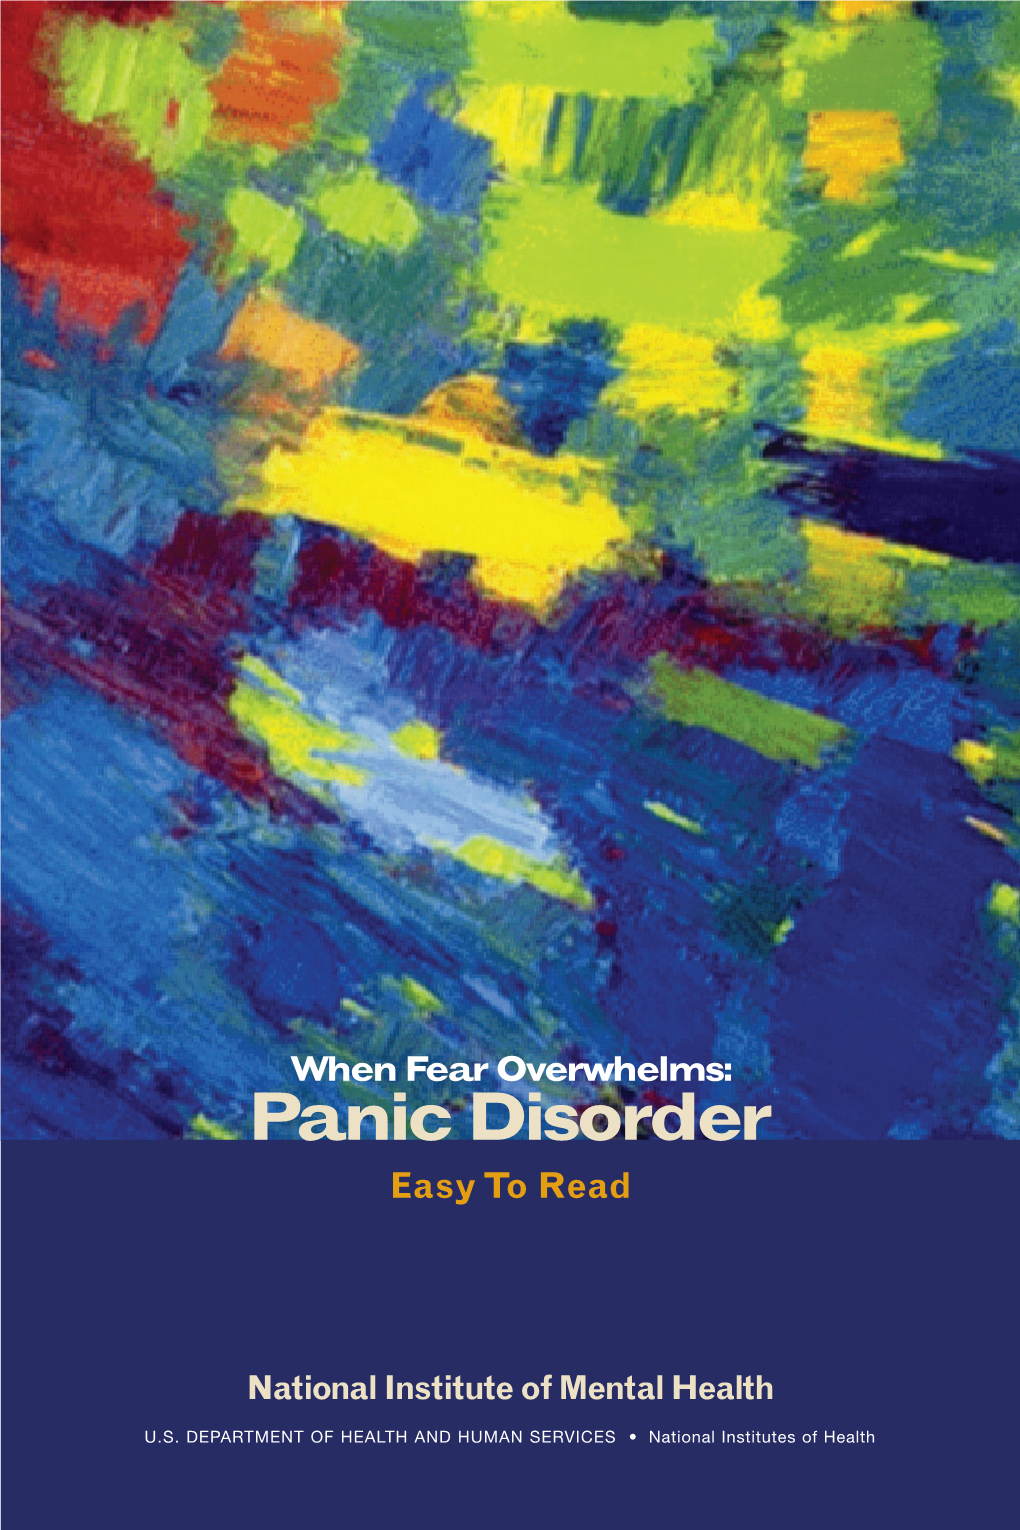 When Fear Overwhelms: Panic Disorder Easy to Read